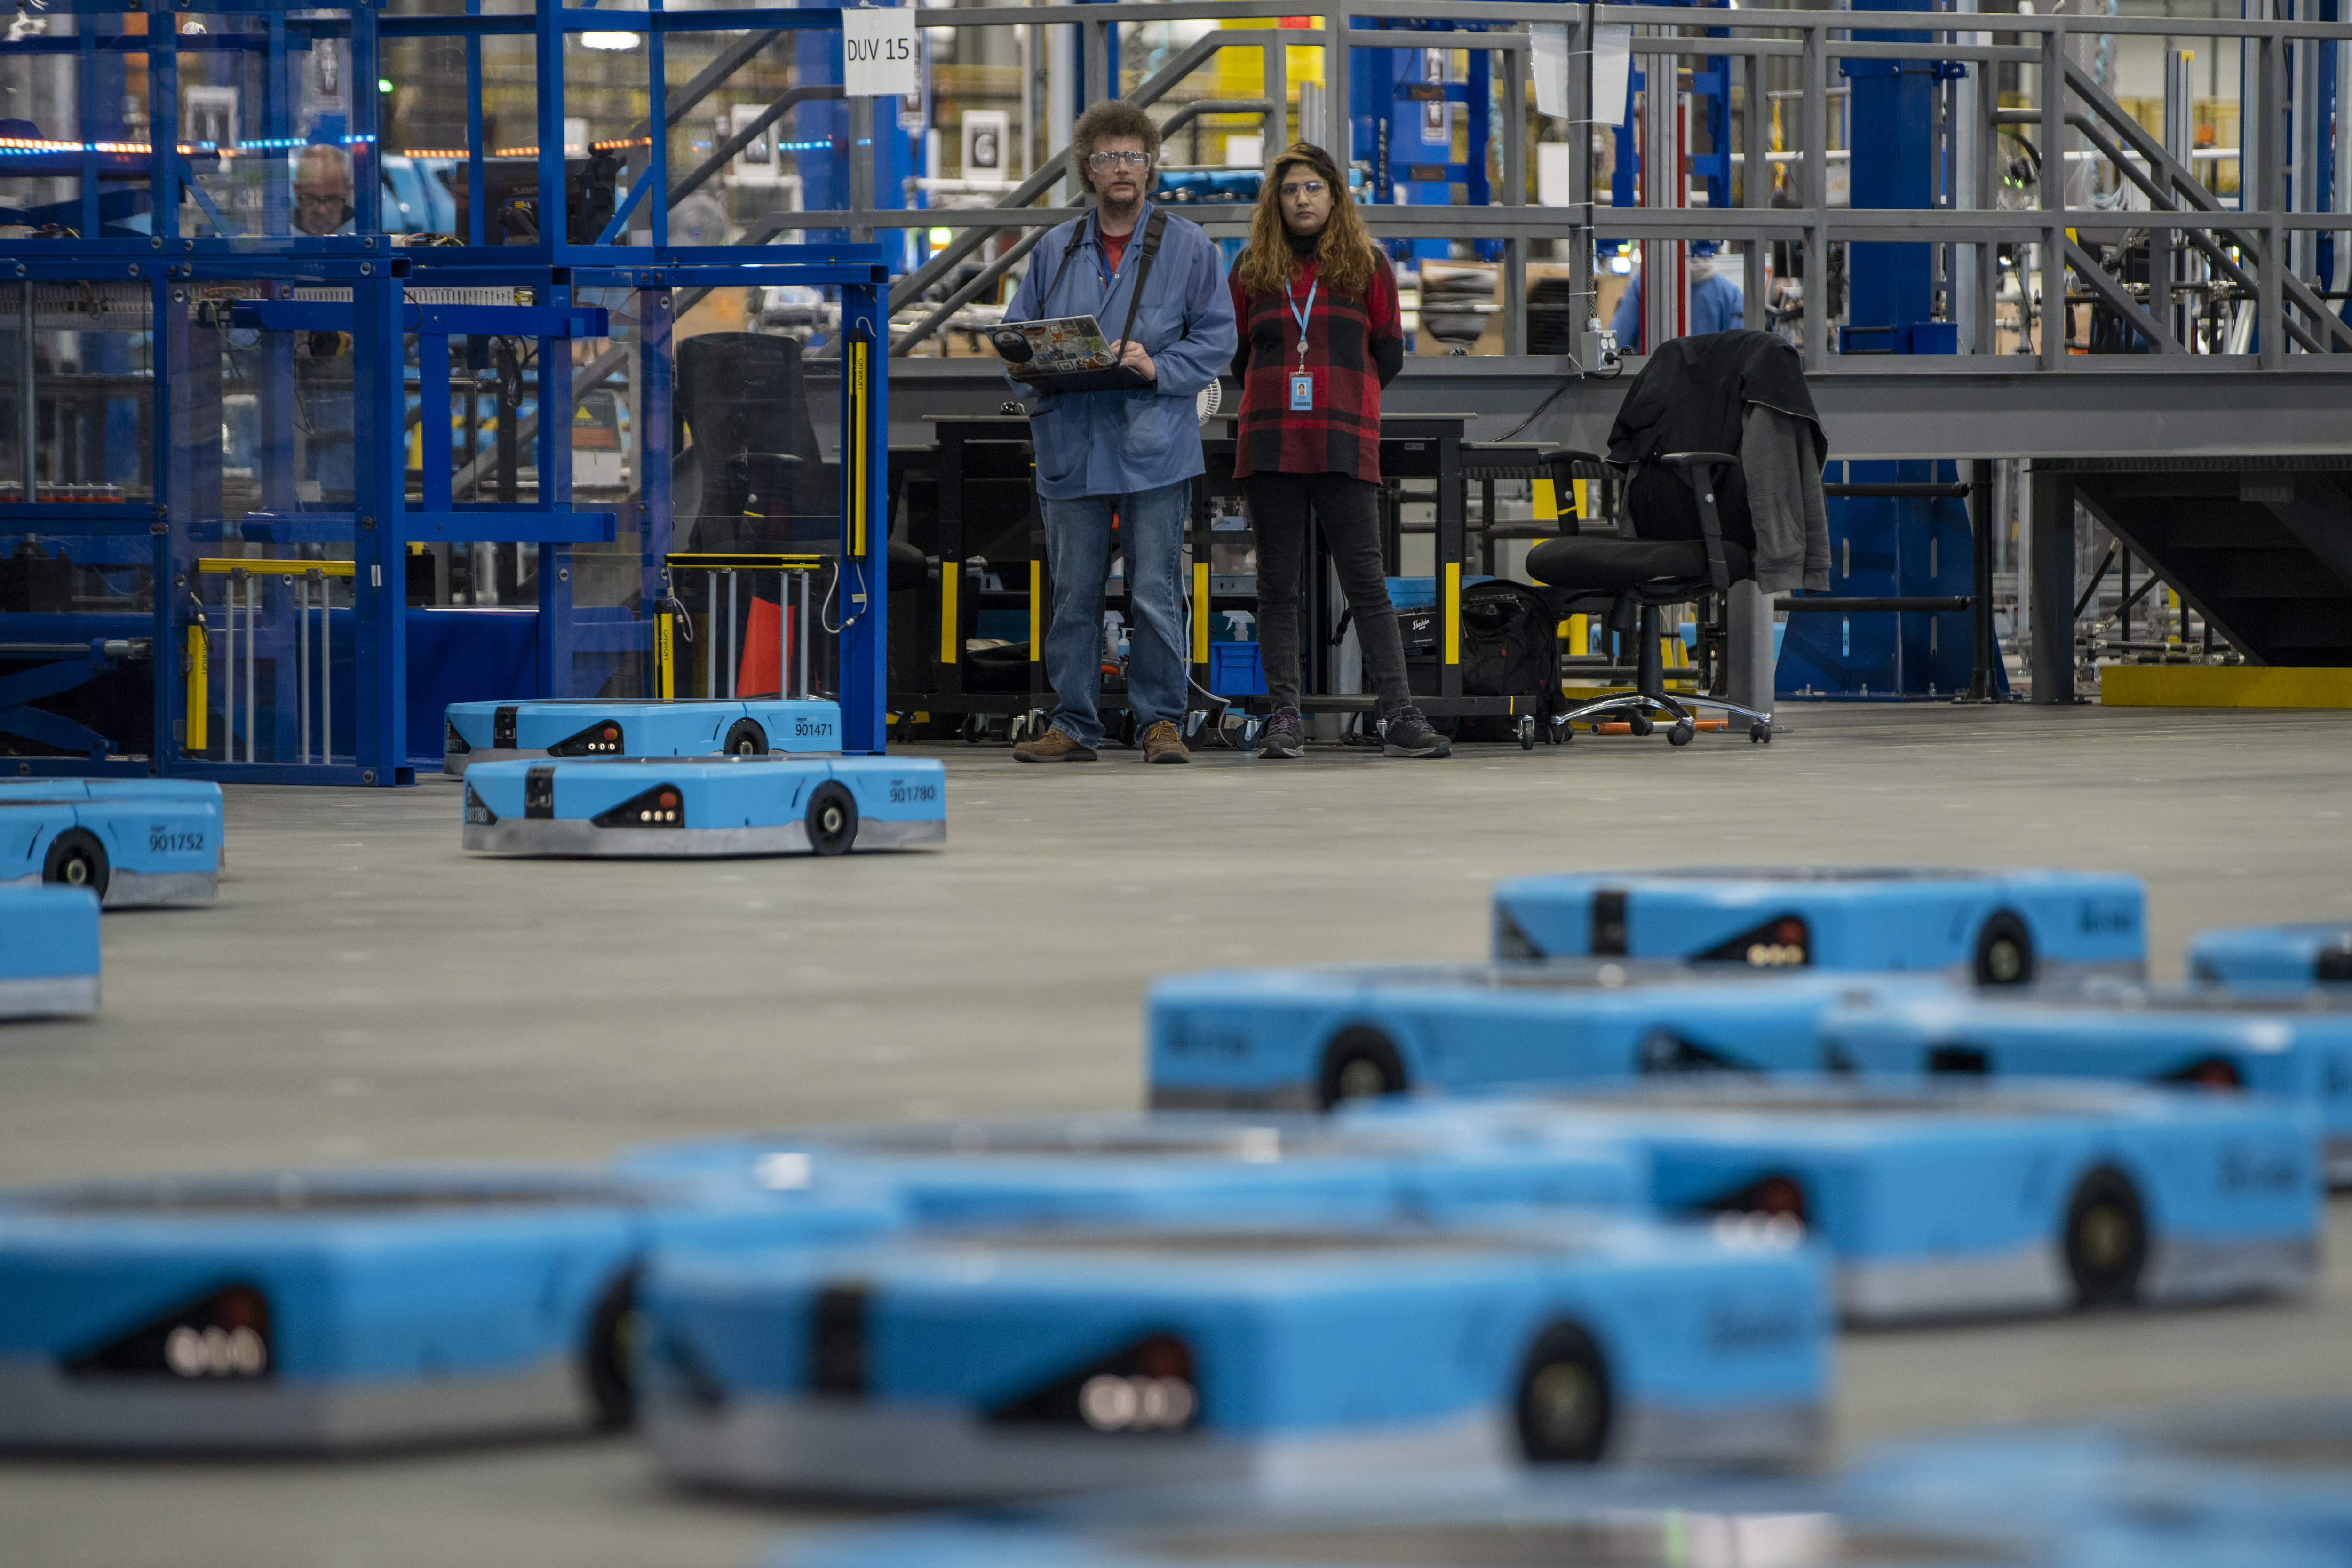 Amazon Hercules robots are tested during the Delivering the Future event at the Amazon Robotics Innovation Hub in Westborough, Massachusetts, US, on Thursday, Nov. 10, 2022. The event offers an overview of the innovations Amazon sees the potential to scale and create lasting impact for the future of delivery. Photographer: M Scott Brauer/Bloomberg via Getty Images